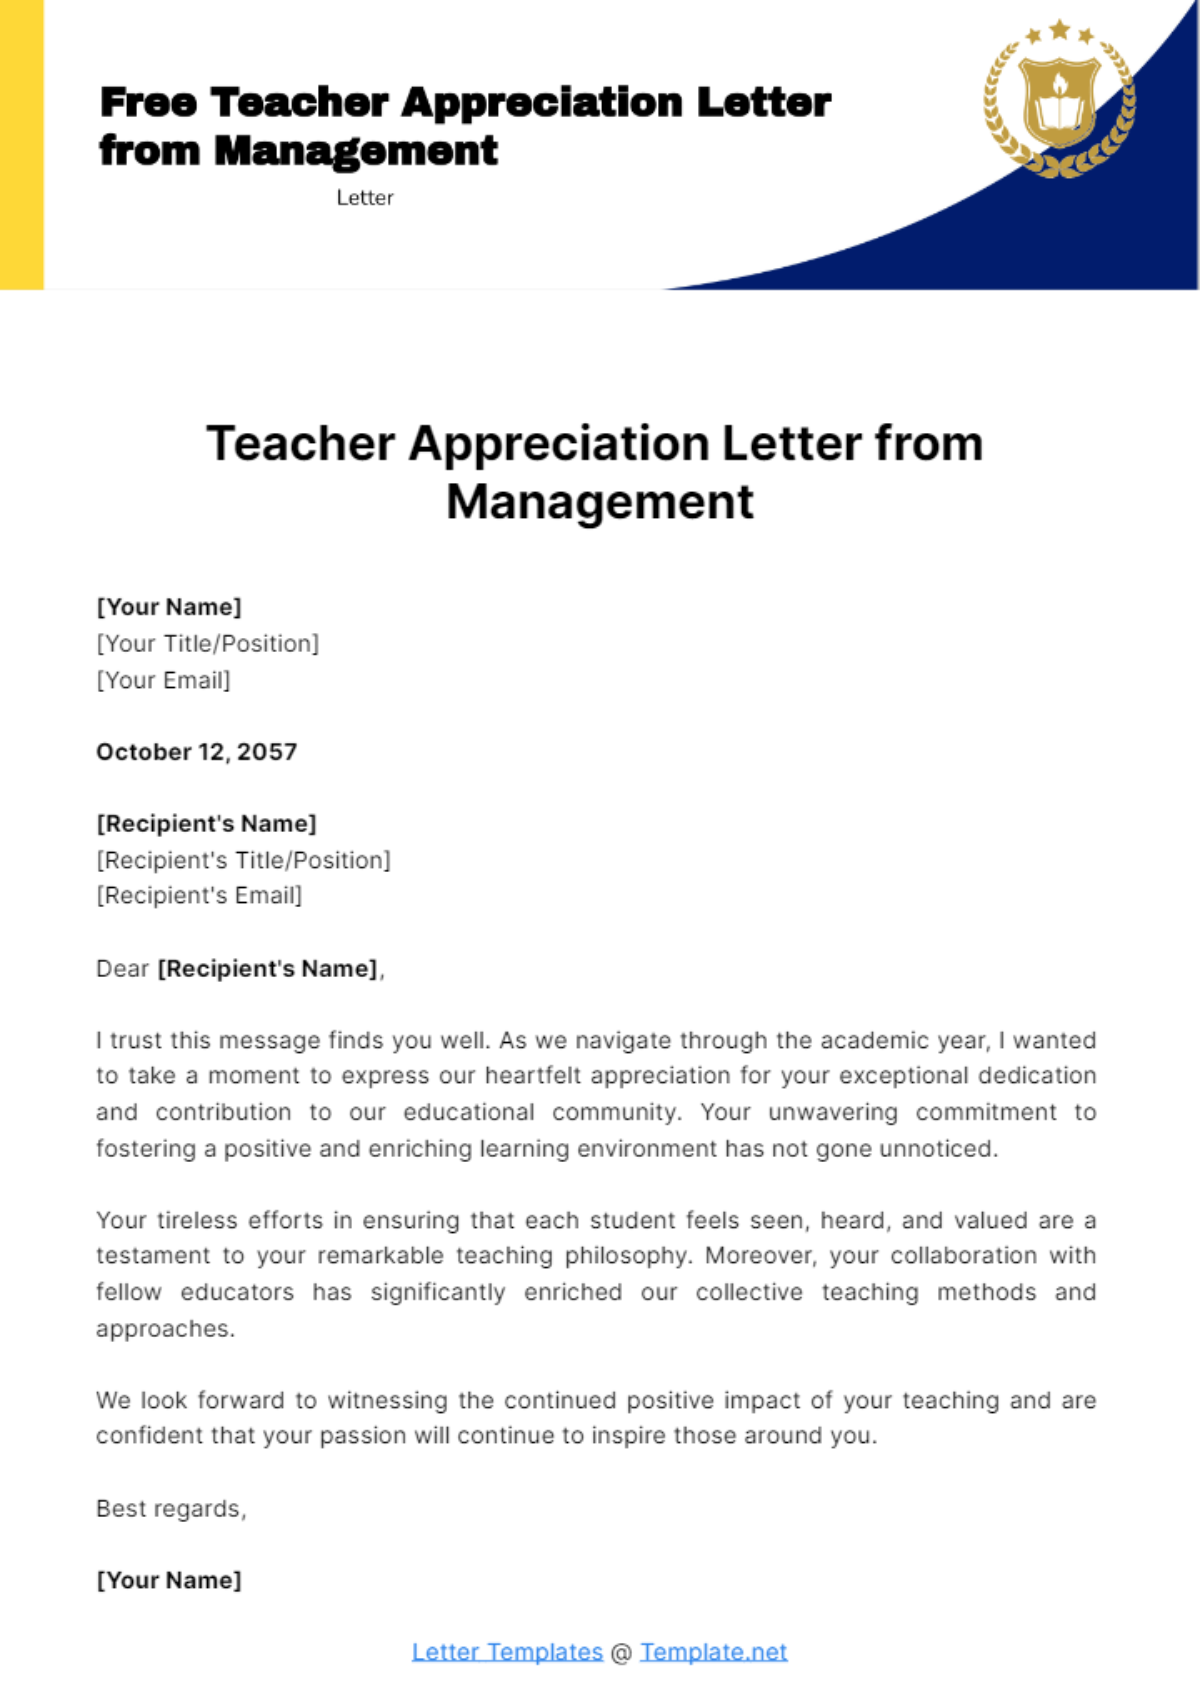 Free Teacher Appreciation Letter from Management Template